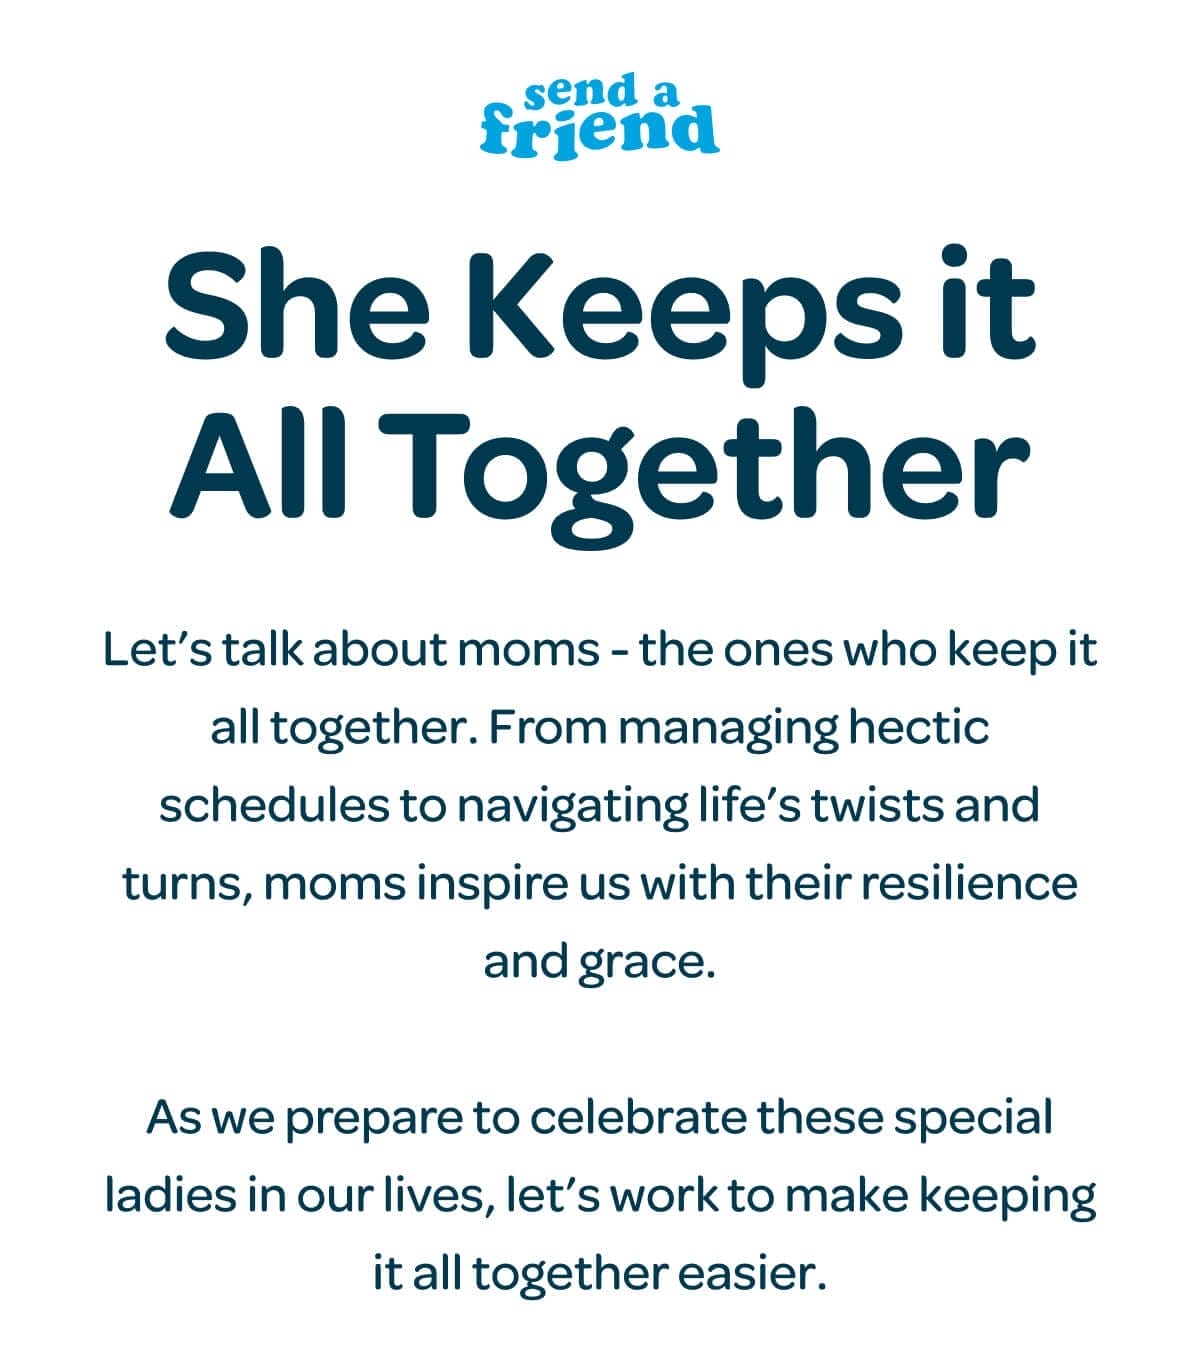 She Keeps it All Together. Let’s talk about moms - the ones who keep it all together. From managing hectic schedules to navigating life’s twists and turns, moms inspire us with their resilience and grace. As we prepare to celebrate these special ladies in our lives, let’s work to make keeping it all together easier. We’ve done just that with our Mother’s Day Bundle. She’ll be ready for pesky hangnail emergencies with a compact nail kit, prepared for unexpected sniffles with a tissue pack, and ready to jot down what’s next on the list with a notepad and pen. The stylish cosmetic bag provides the perfect place to keep these essentials together.